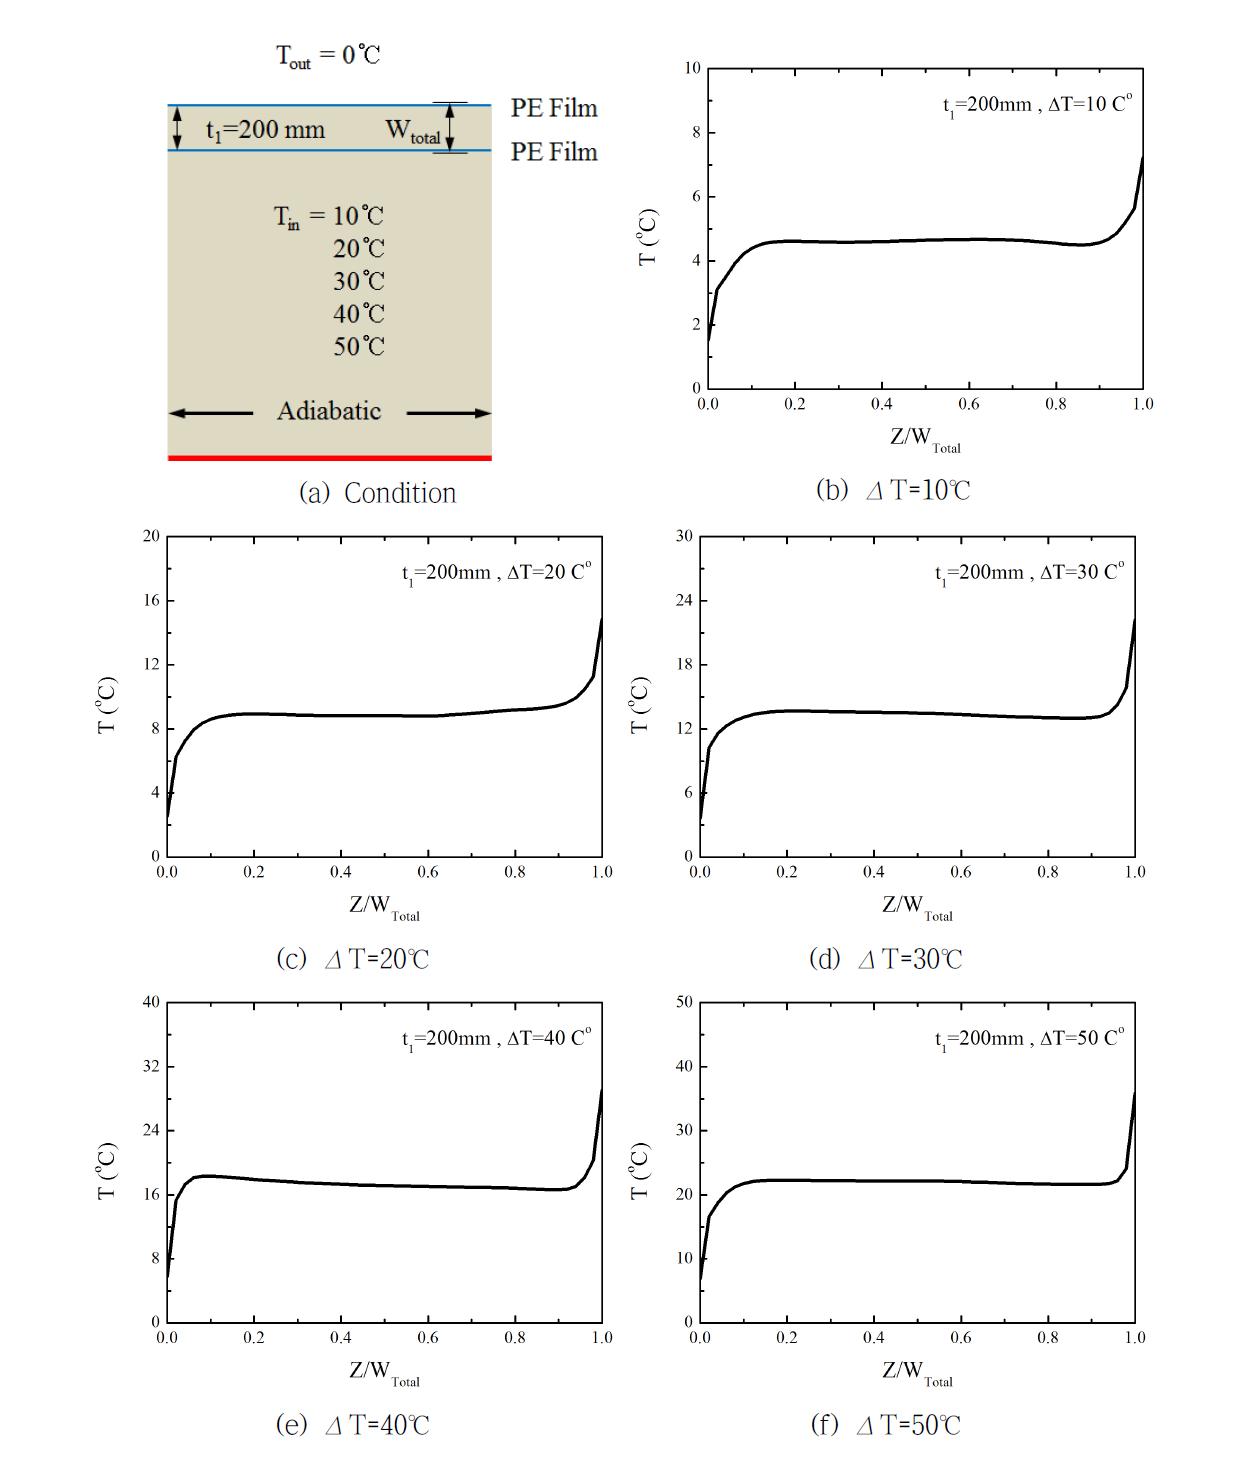 Distributions of inner temperatures with variation of temperature difference for Polyethylene film 2 layers at film-to-film distances 200mm